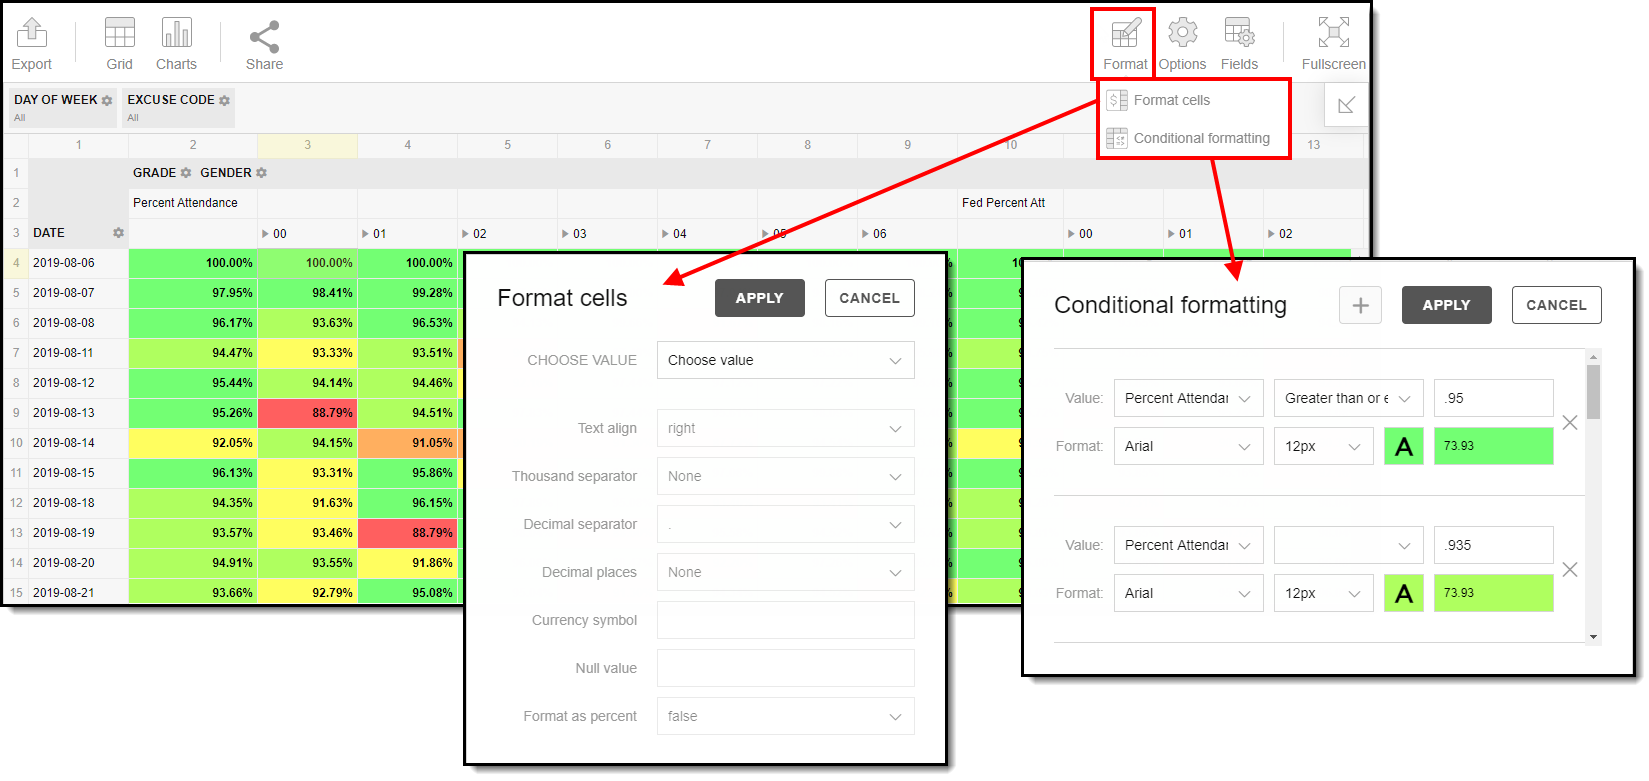 screenshot of the format button being selected and the format and conditional formatting filter options provided to a user